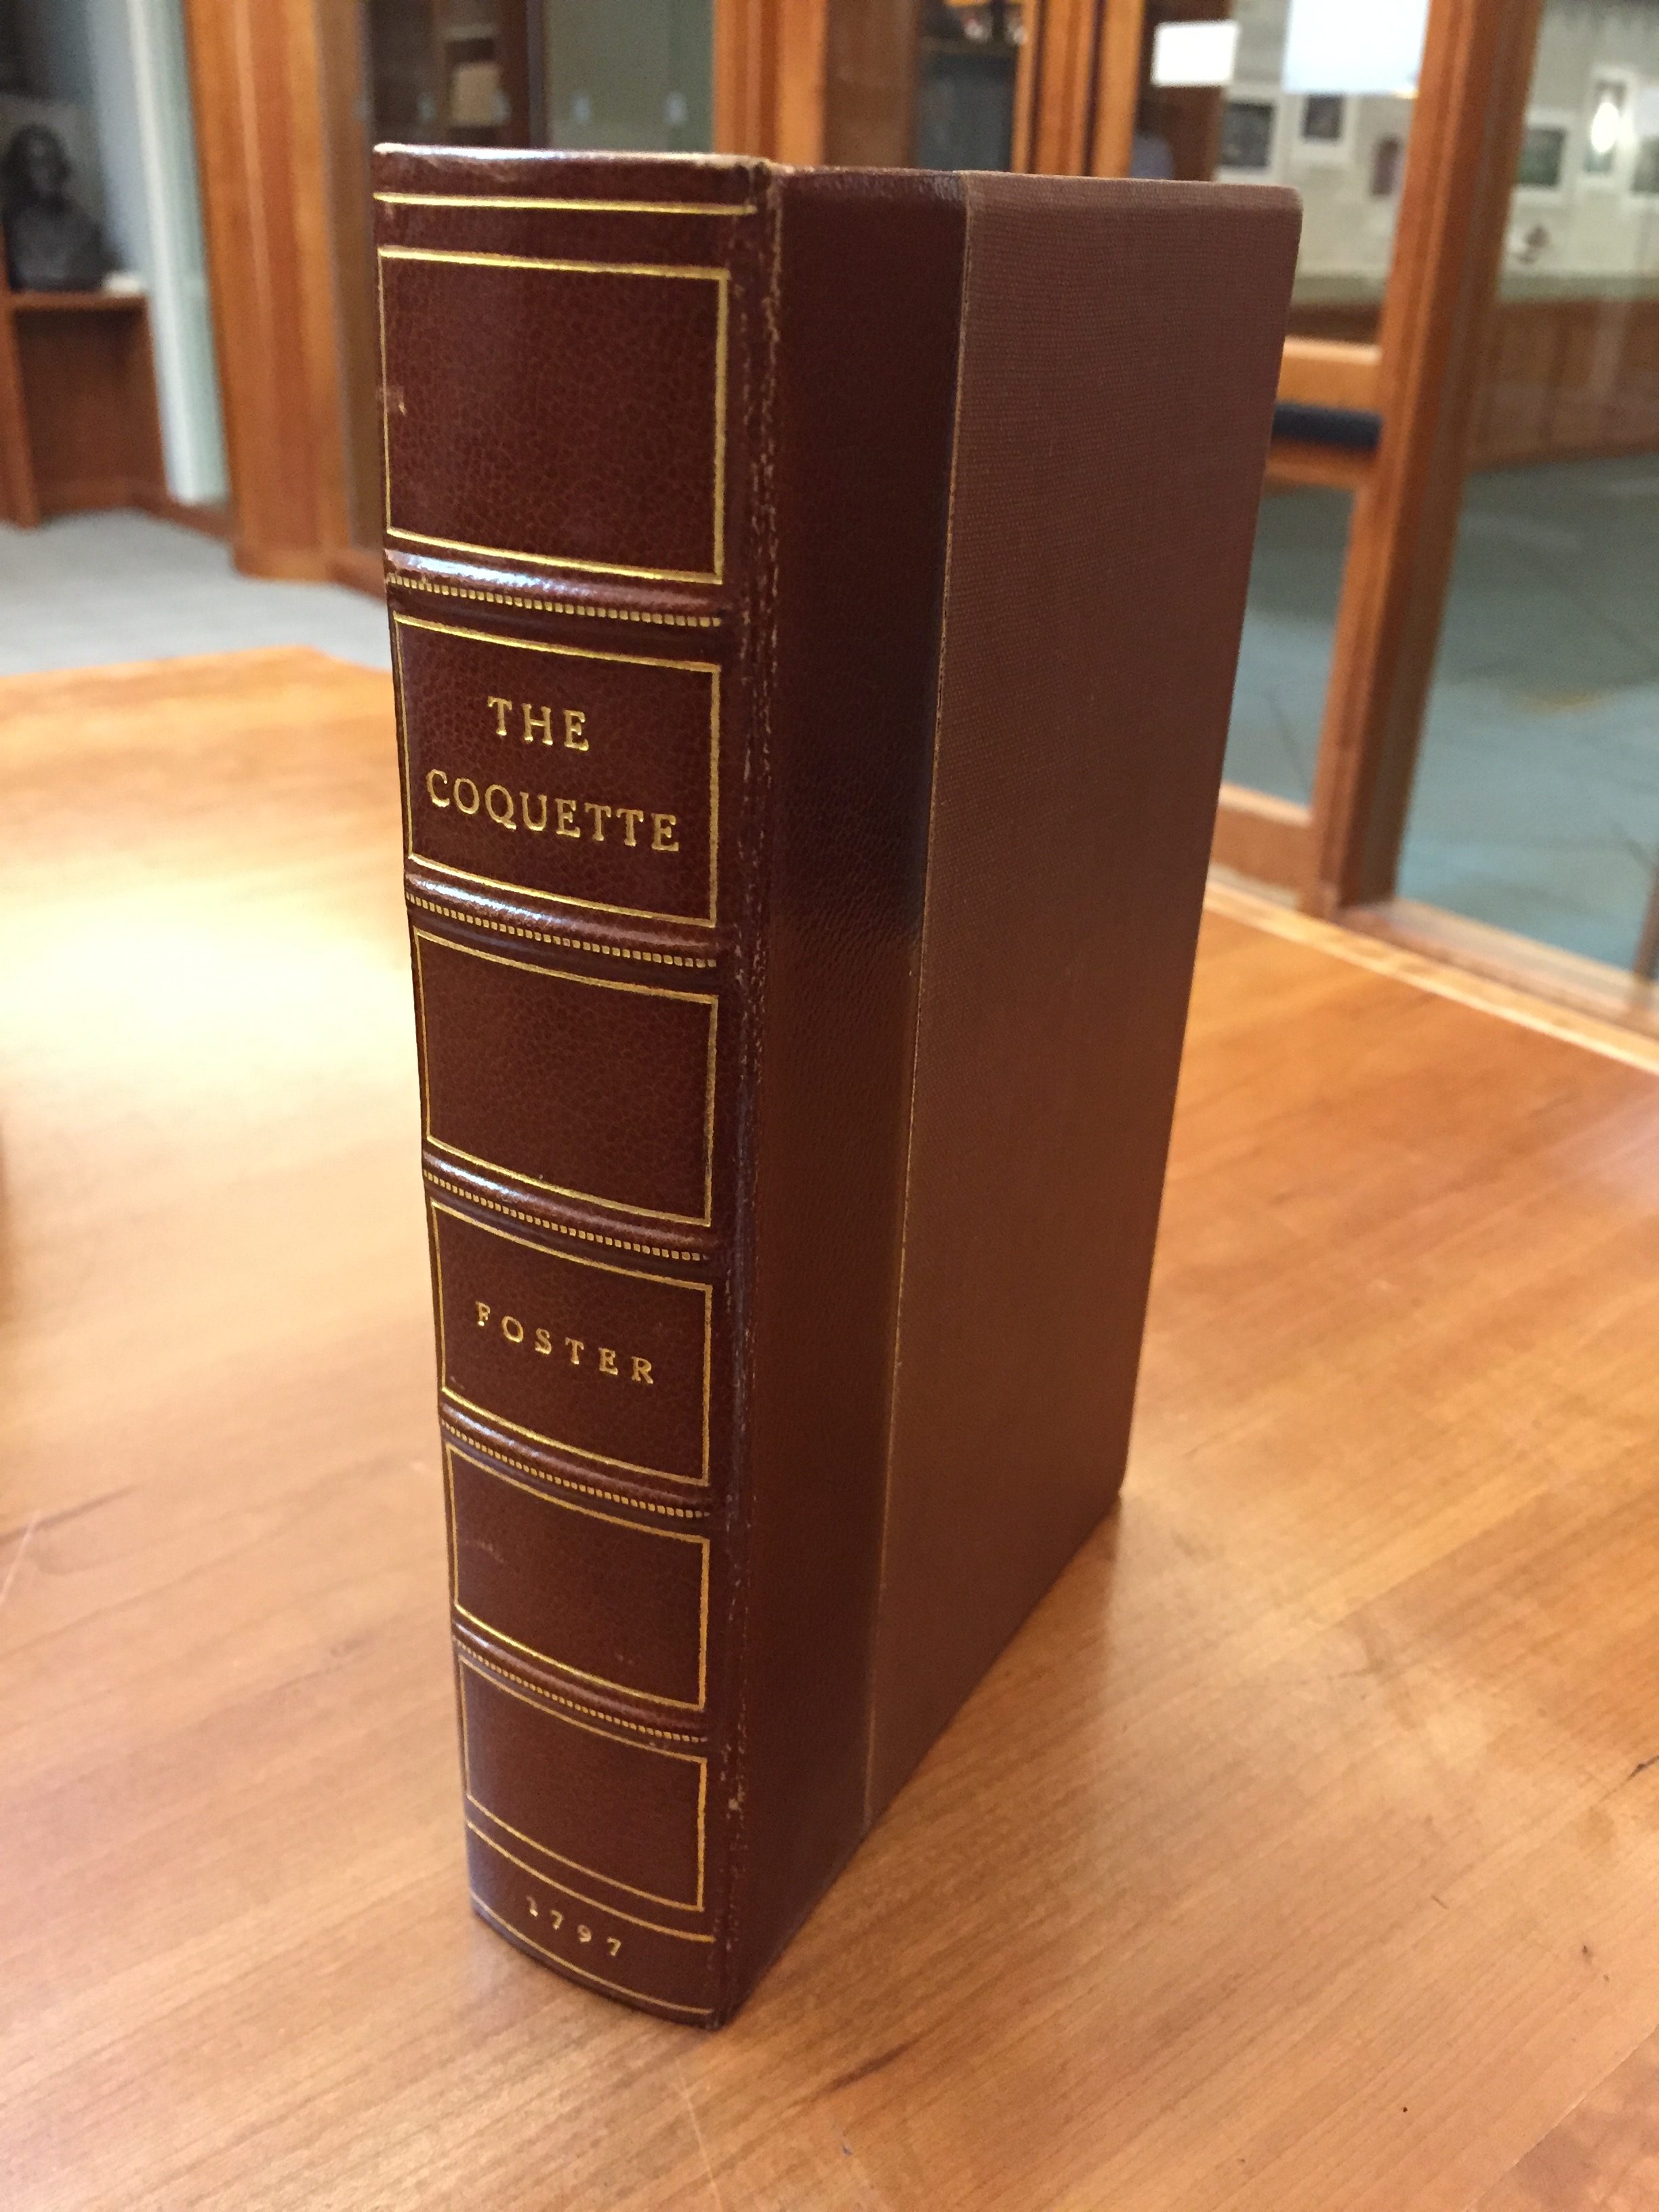 The custom box holding the library's copy of the first edition of The Coquette (Taylor 1797 . F68 C6). Photograph by Molly Schwartzburg